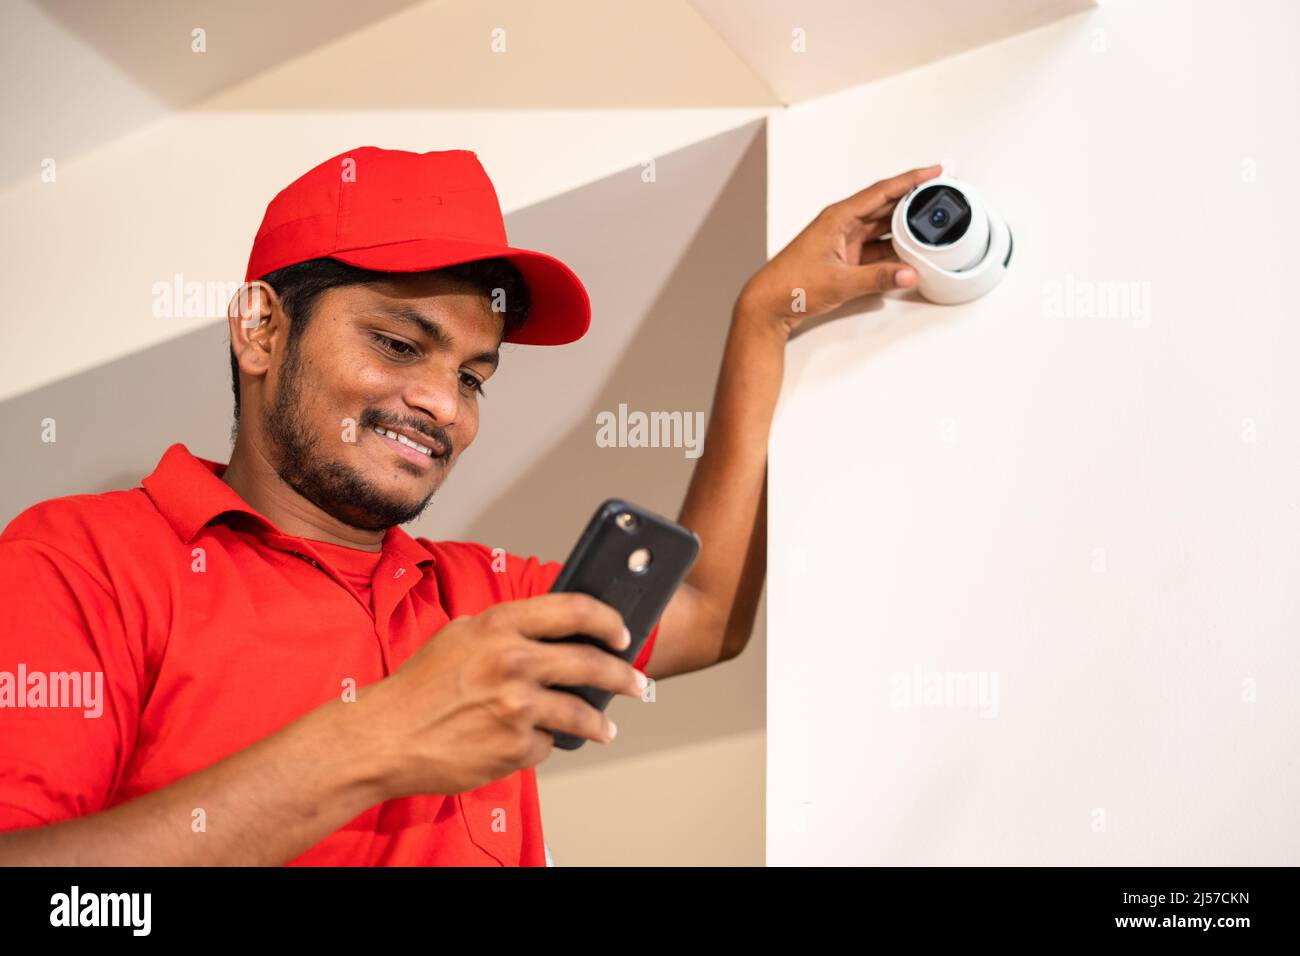 Smiling cctv technician busy using mobile phone for check settings or controlling at home while on ladder - concept of safety, technology and Stock Photo